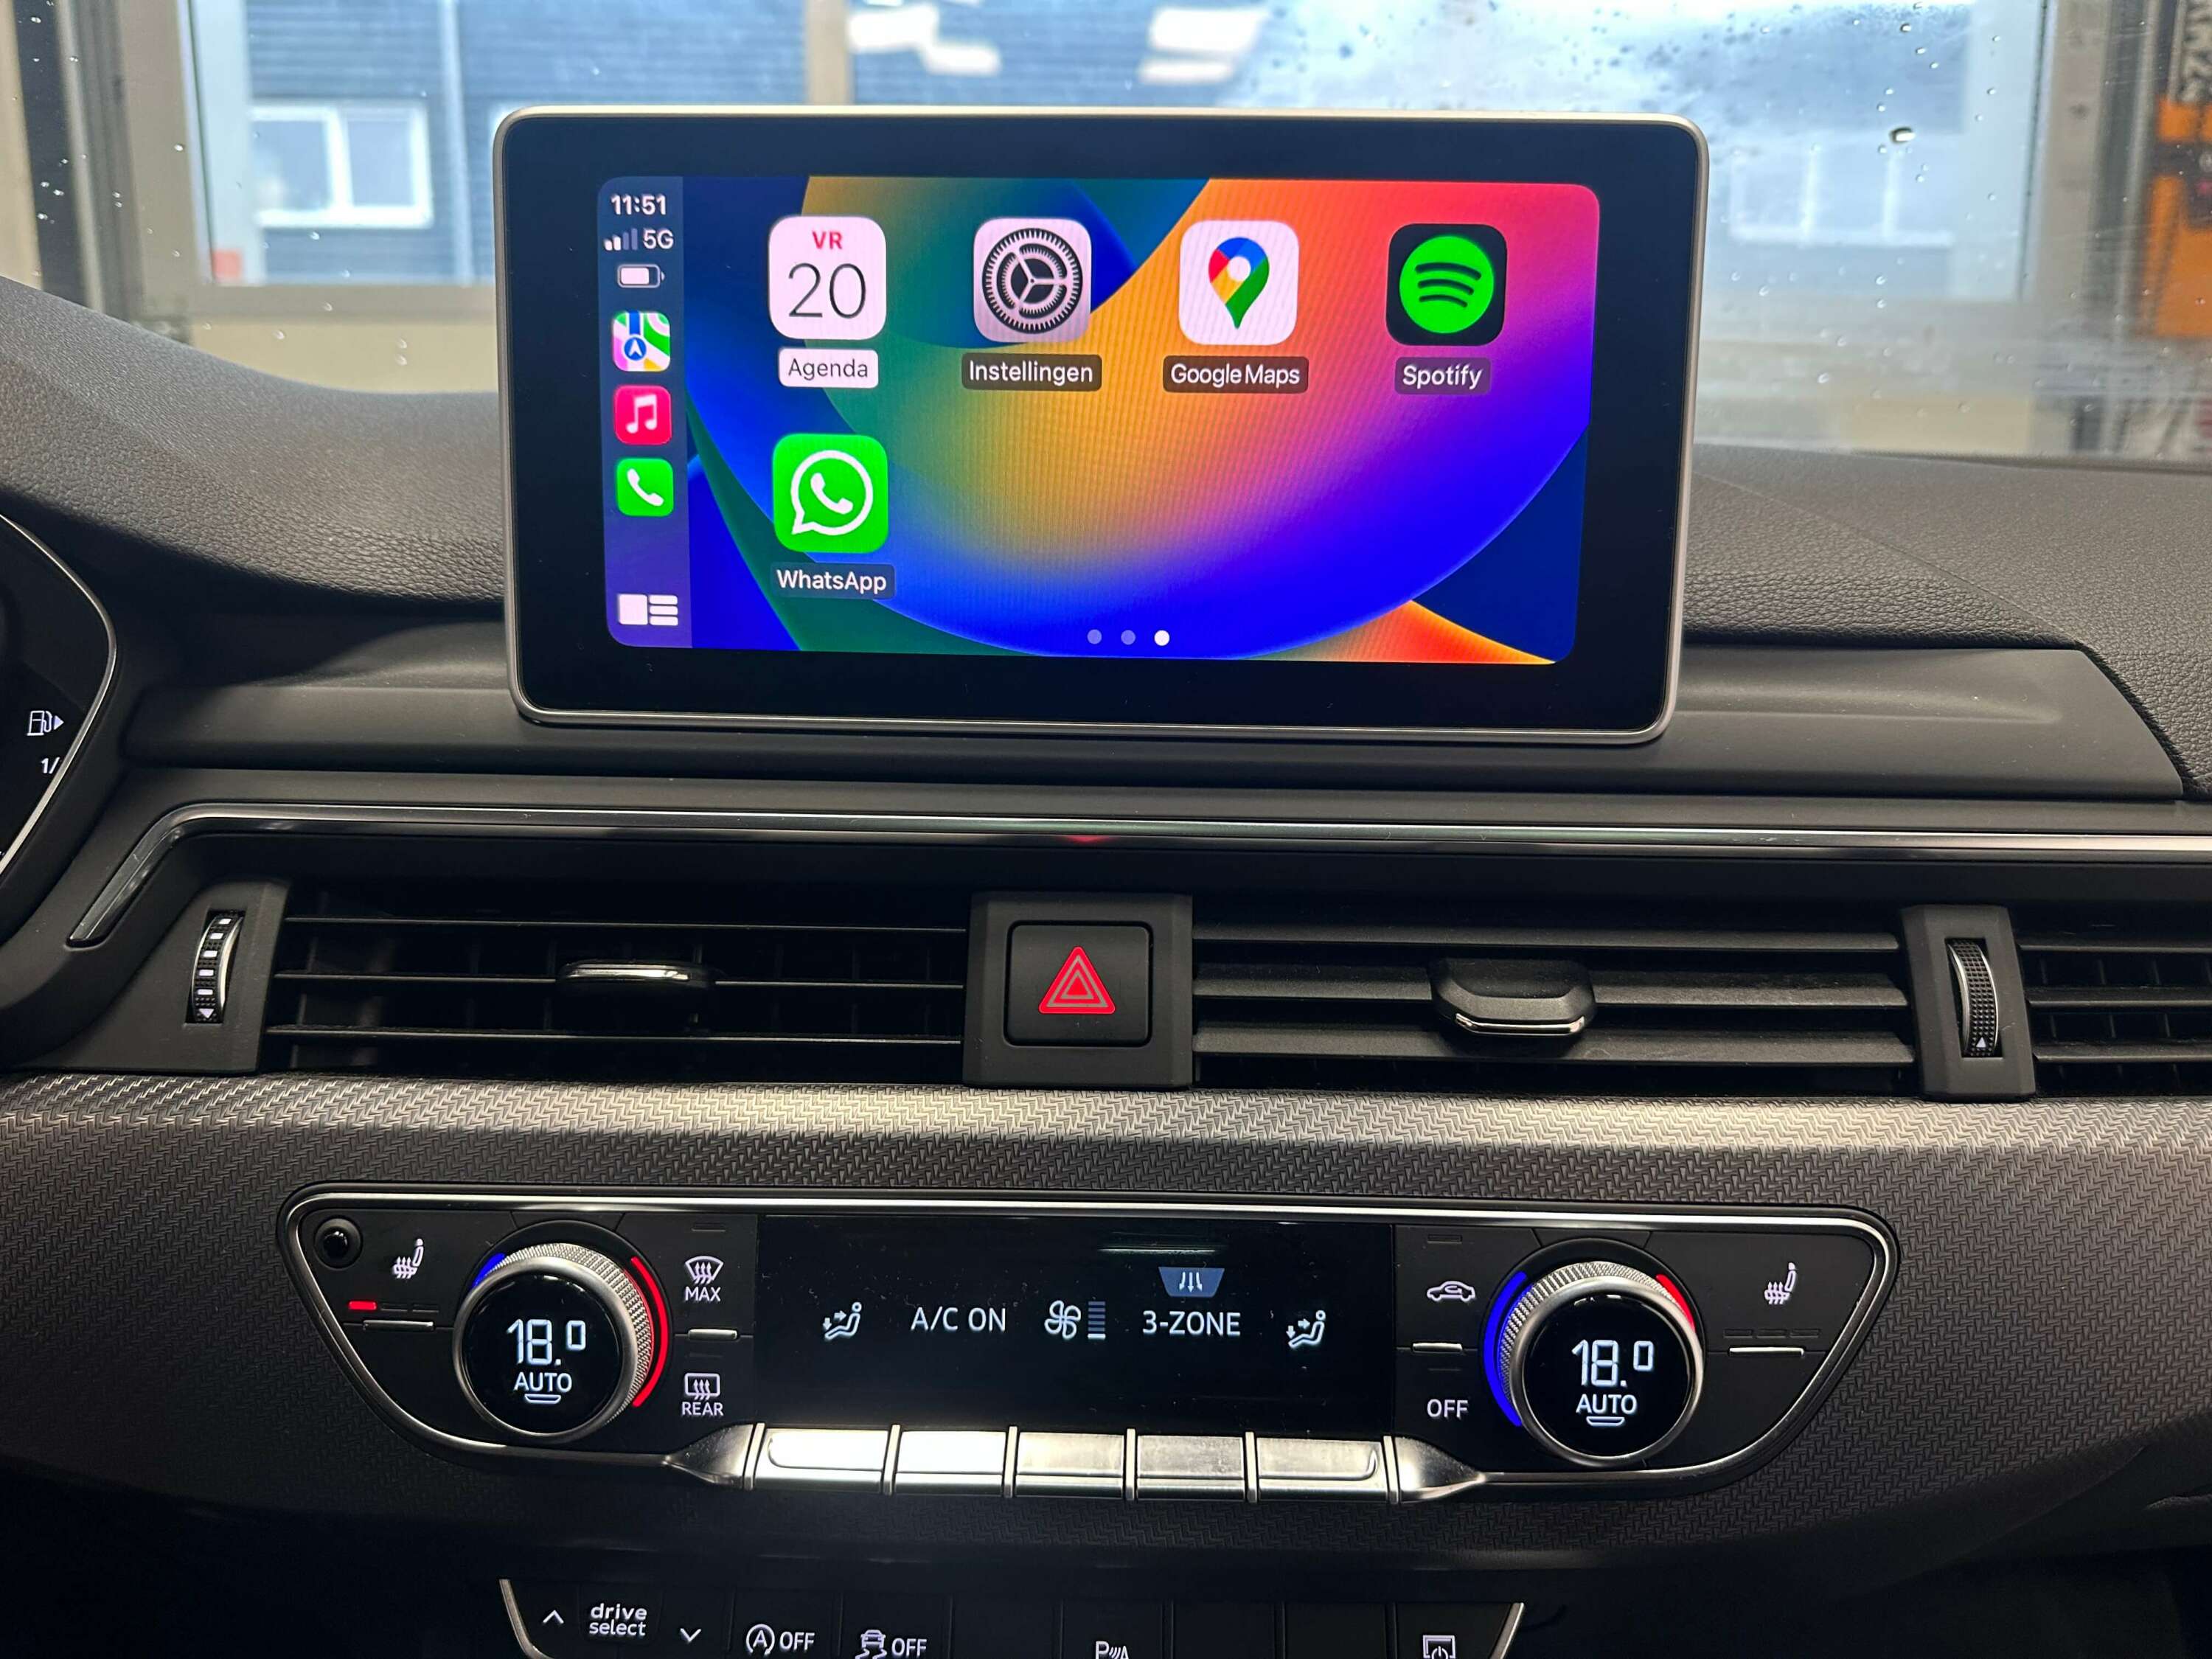 android-auto-installeren-inbouwen-audi-a4-a5-scaled